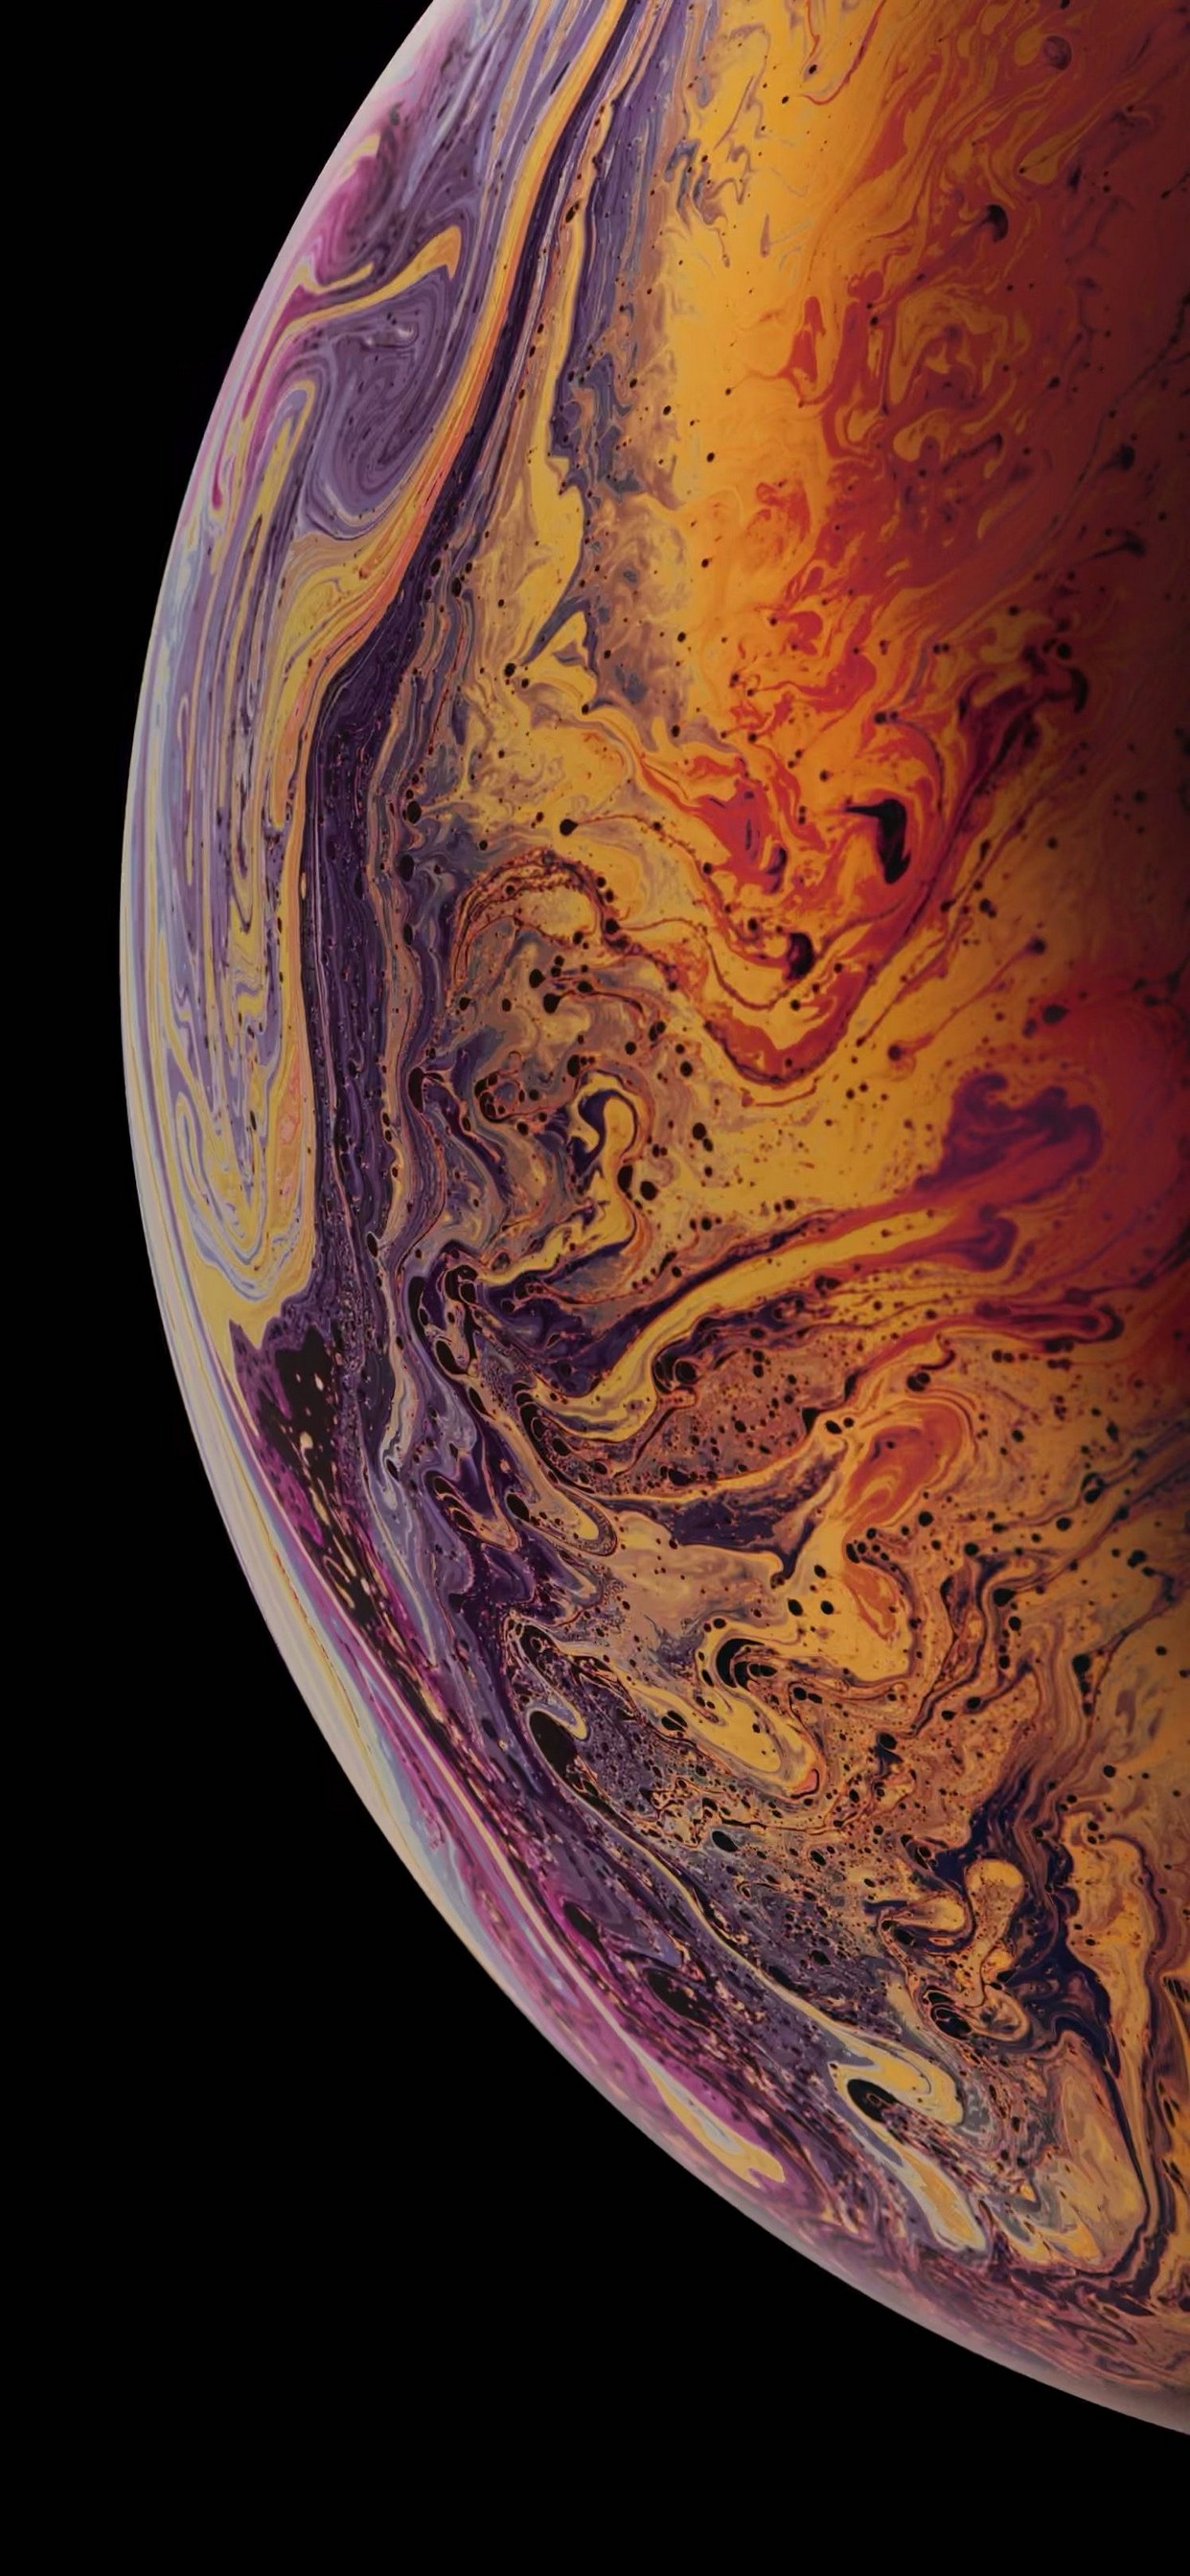 iPhone XS Max Wallpaper Tumblr With high-resolution 1242X2688 pixel. You can set as wallpaper for Apple iPhone X, XS Max, XR, 8, 7, 6, SE, iPad. Enjoy and share your favorite HD wallpapers and background images